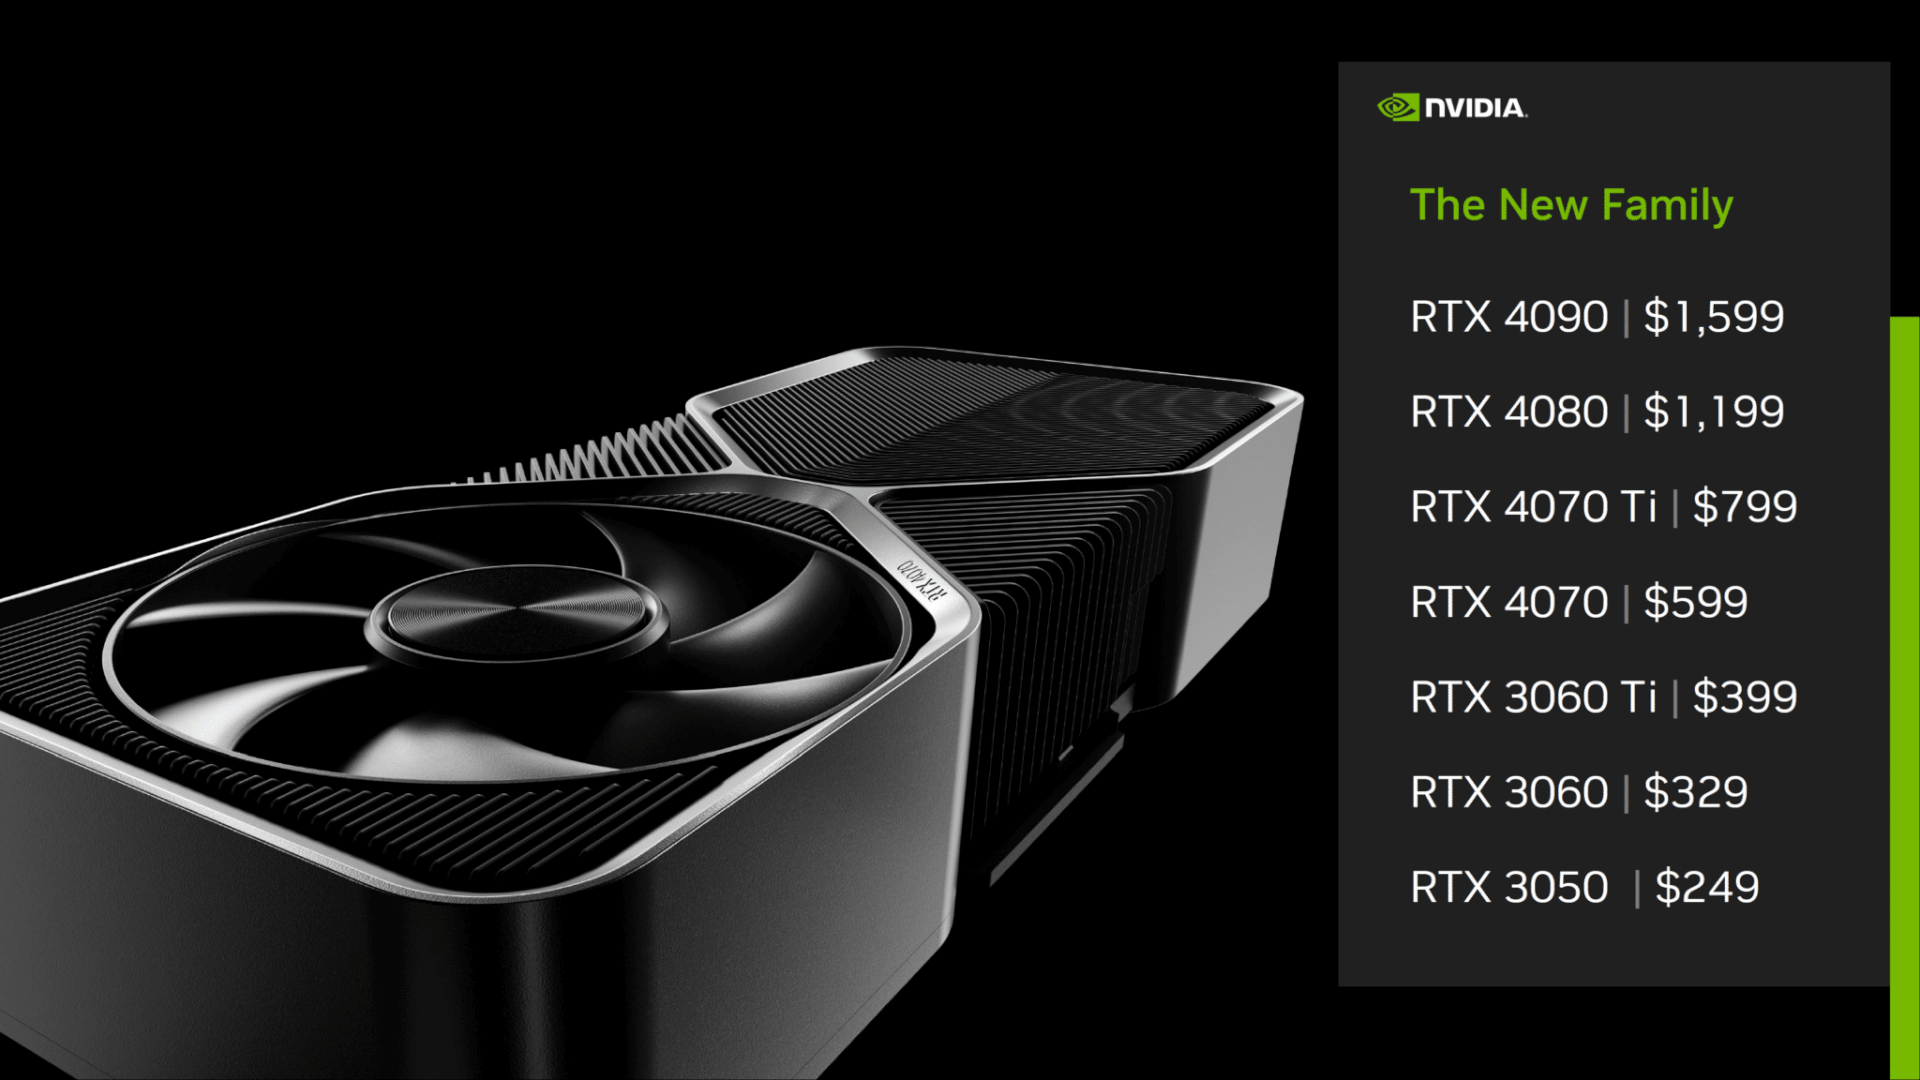 AMD Radeon RX 7800 Benchmark Leaks Out: Faster than NVIDIA's RTX 4070  [Rumor]